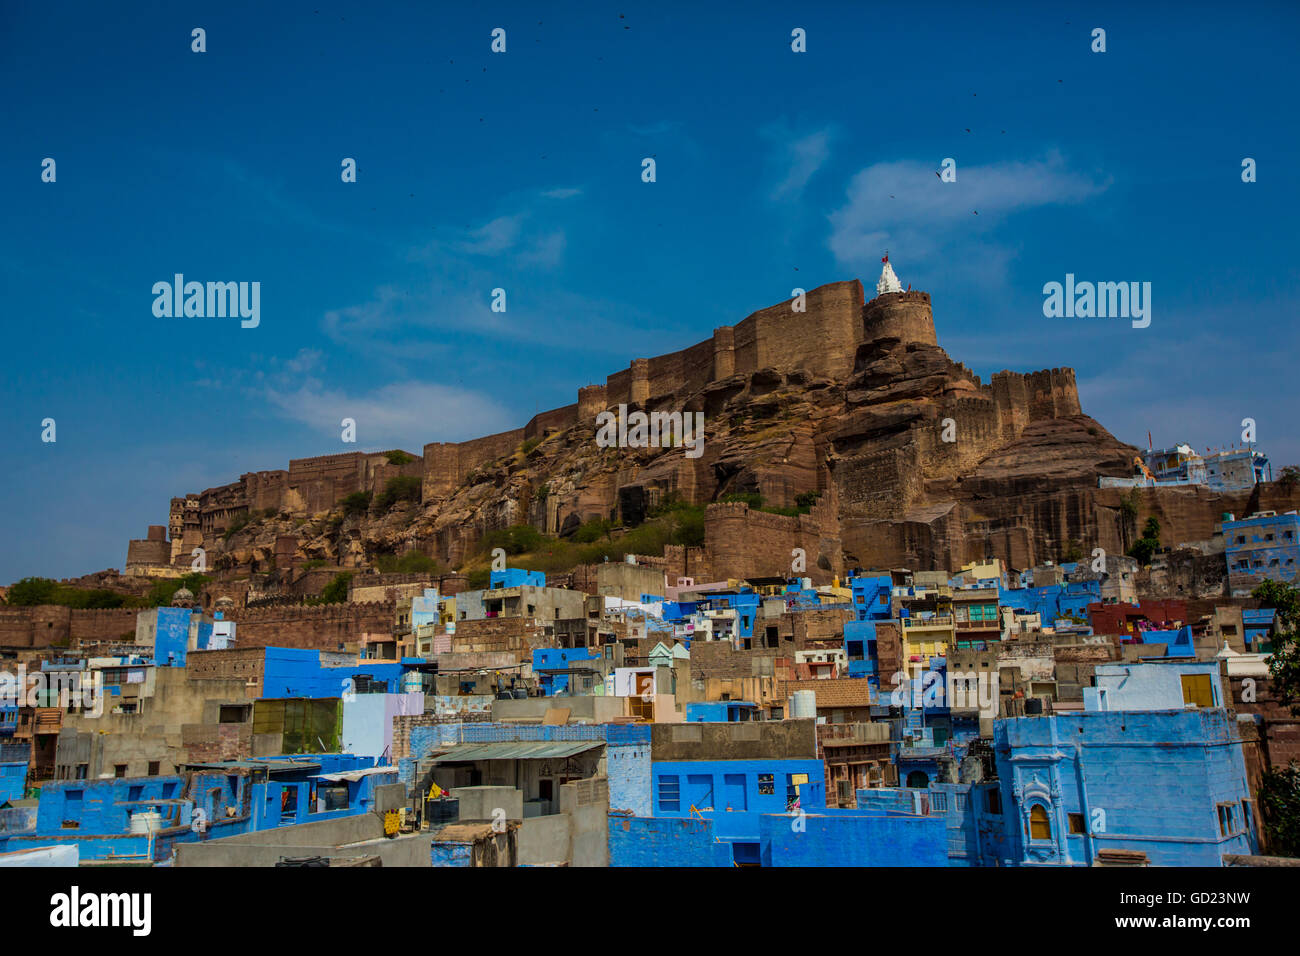 Mehrangarh Fort towering over the blue rooftops in Jodhpur, the Blue City, Rajasthan, India, Asia Stock Photo